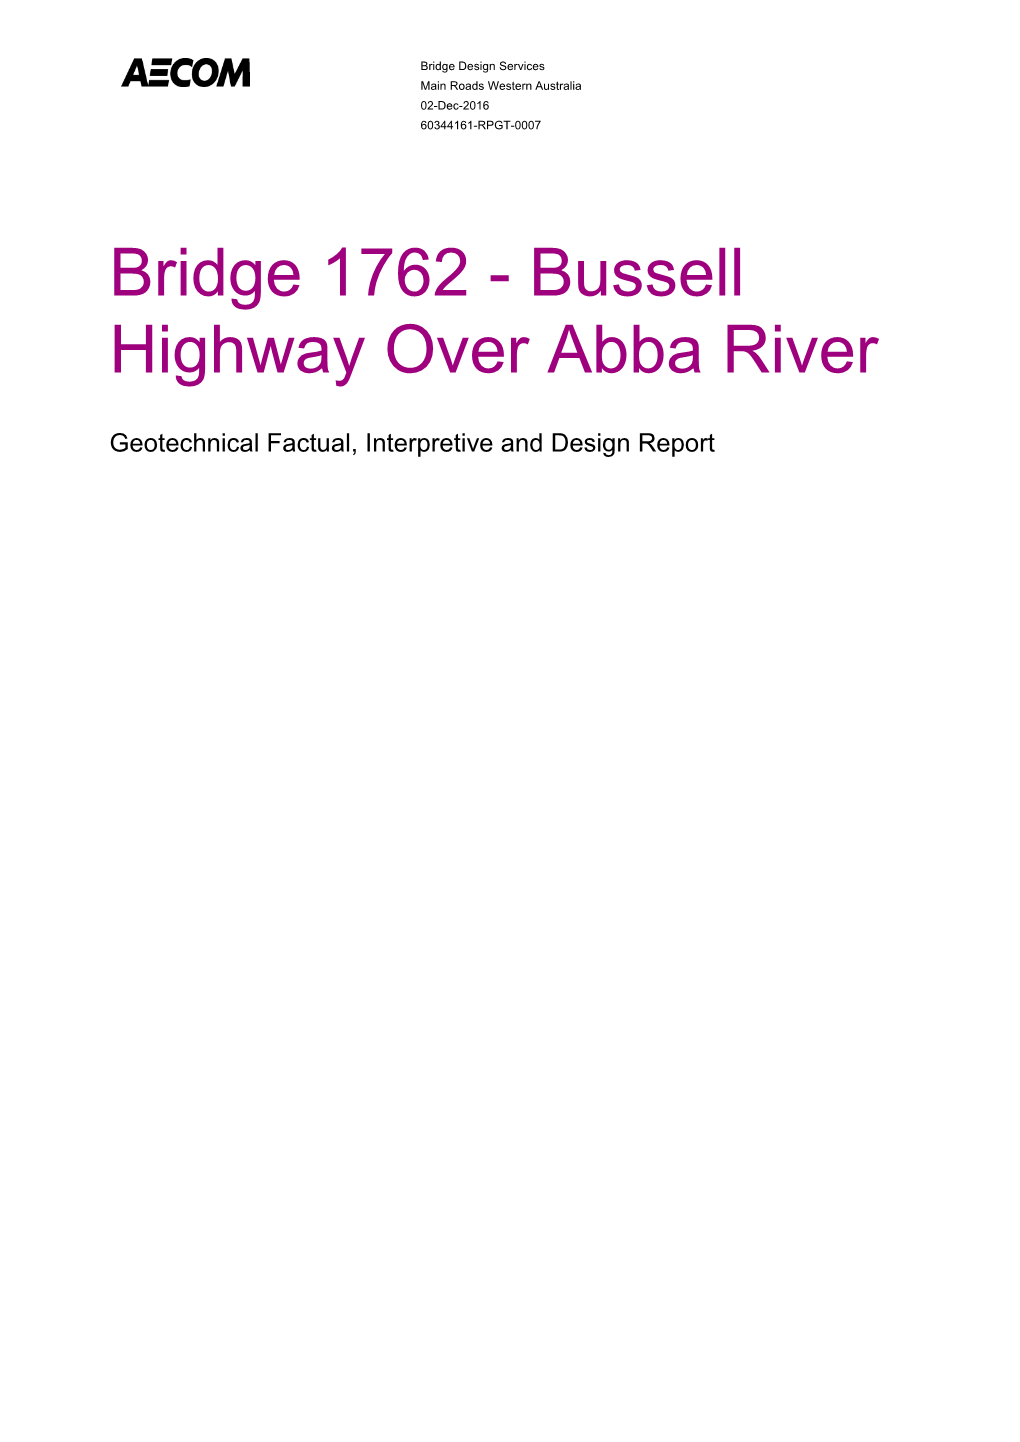 Bridge 1762 - Bussell Highway Over Abba River